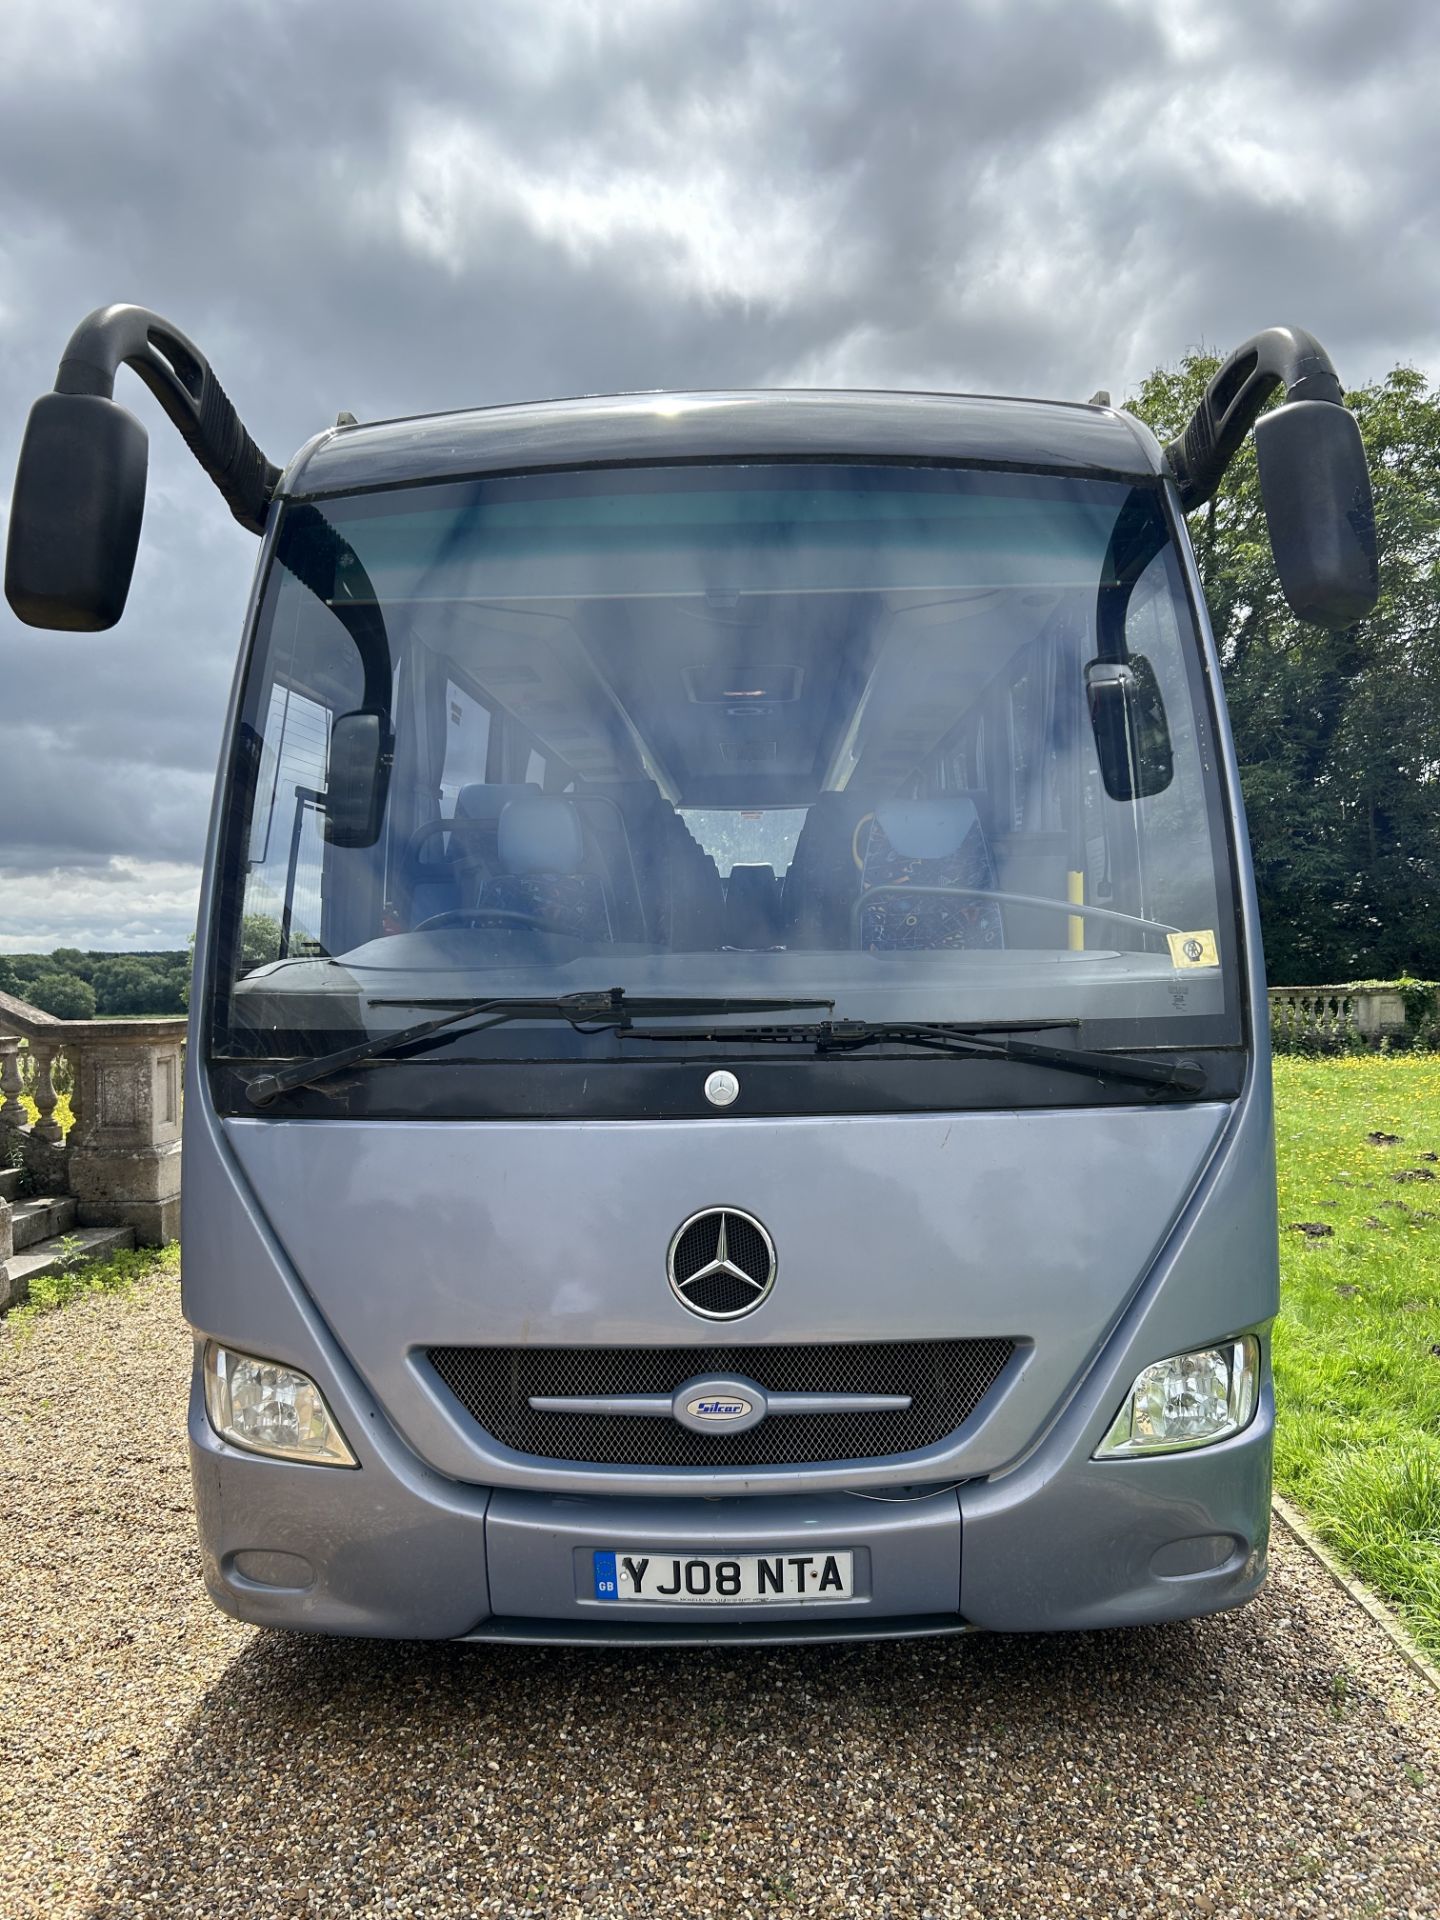 Mercedes Benz 33 Seater Coach - Image 2 of 4